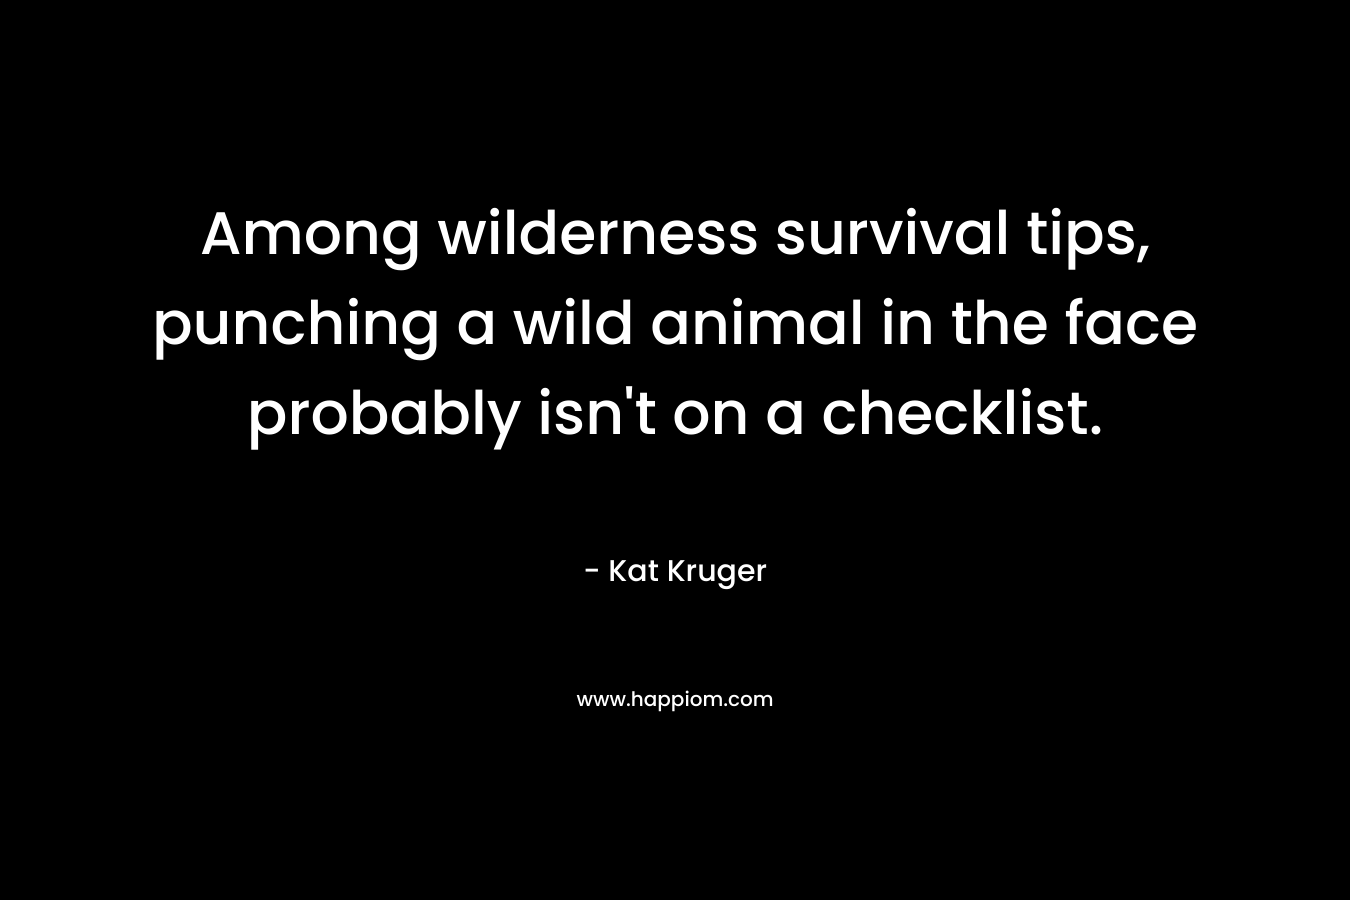 Among wilderness survival tips, punching a wild animal in the face probably isn’t on a checklist. – Kat Kruger